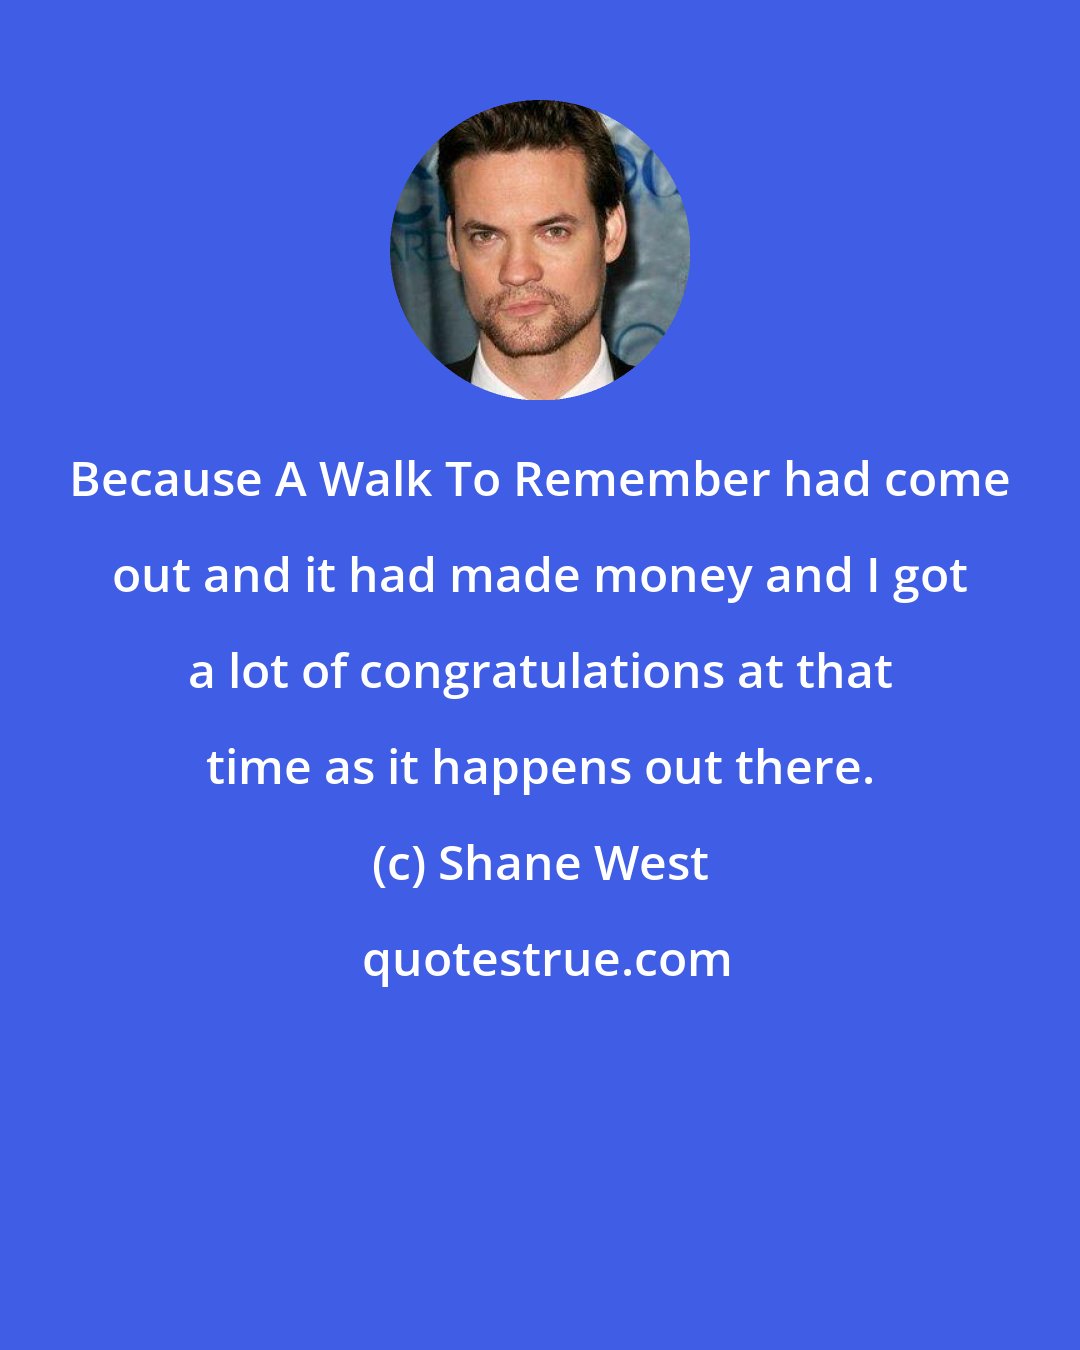 Shane West: Because A Walk To Remember had come out and it had made money and I got a lot of congratulations at that time as it happens out there.